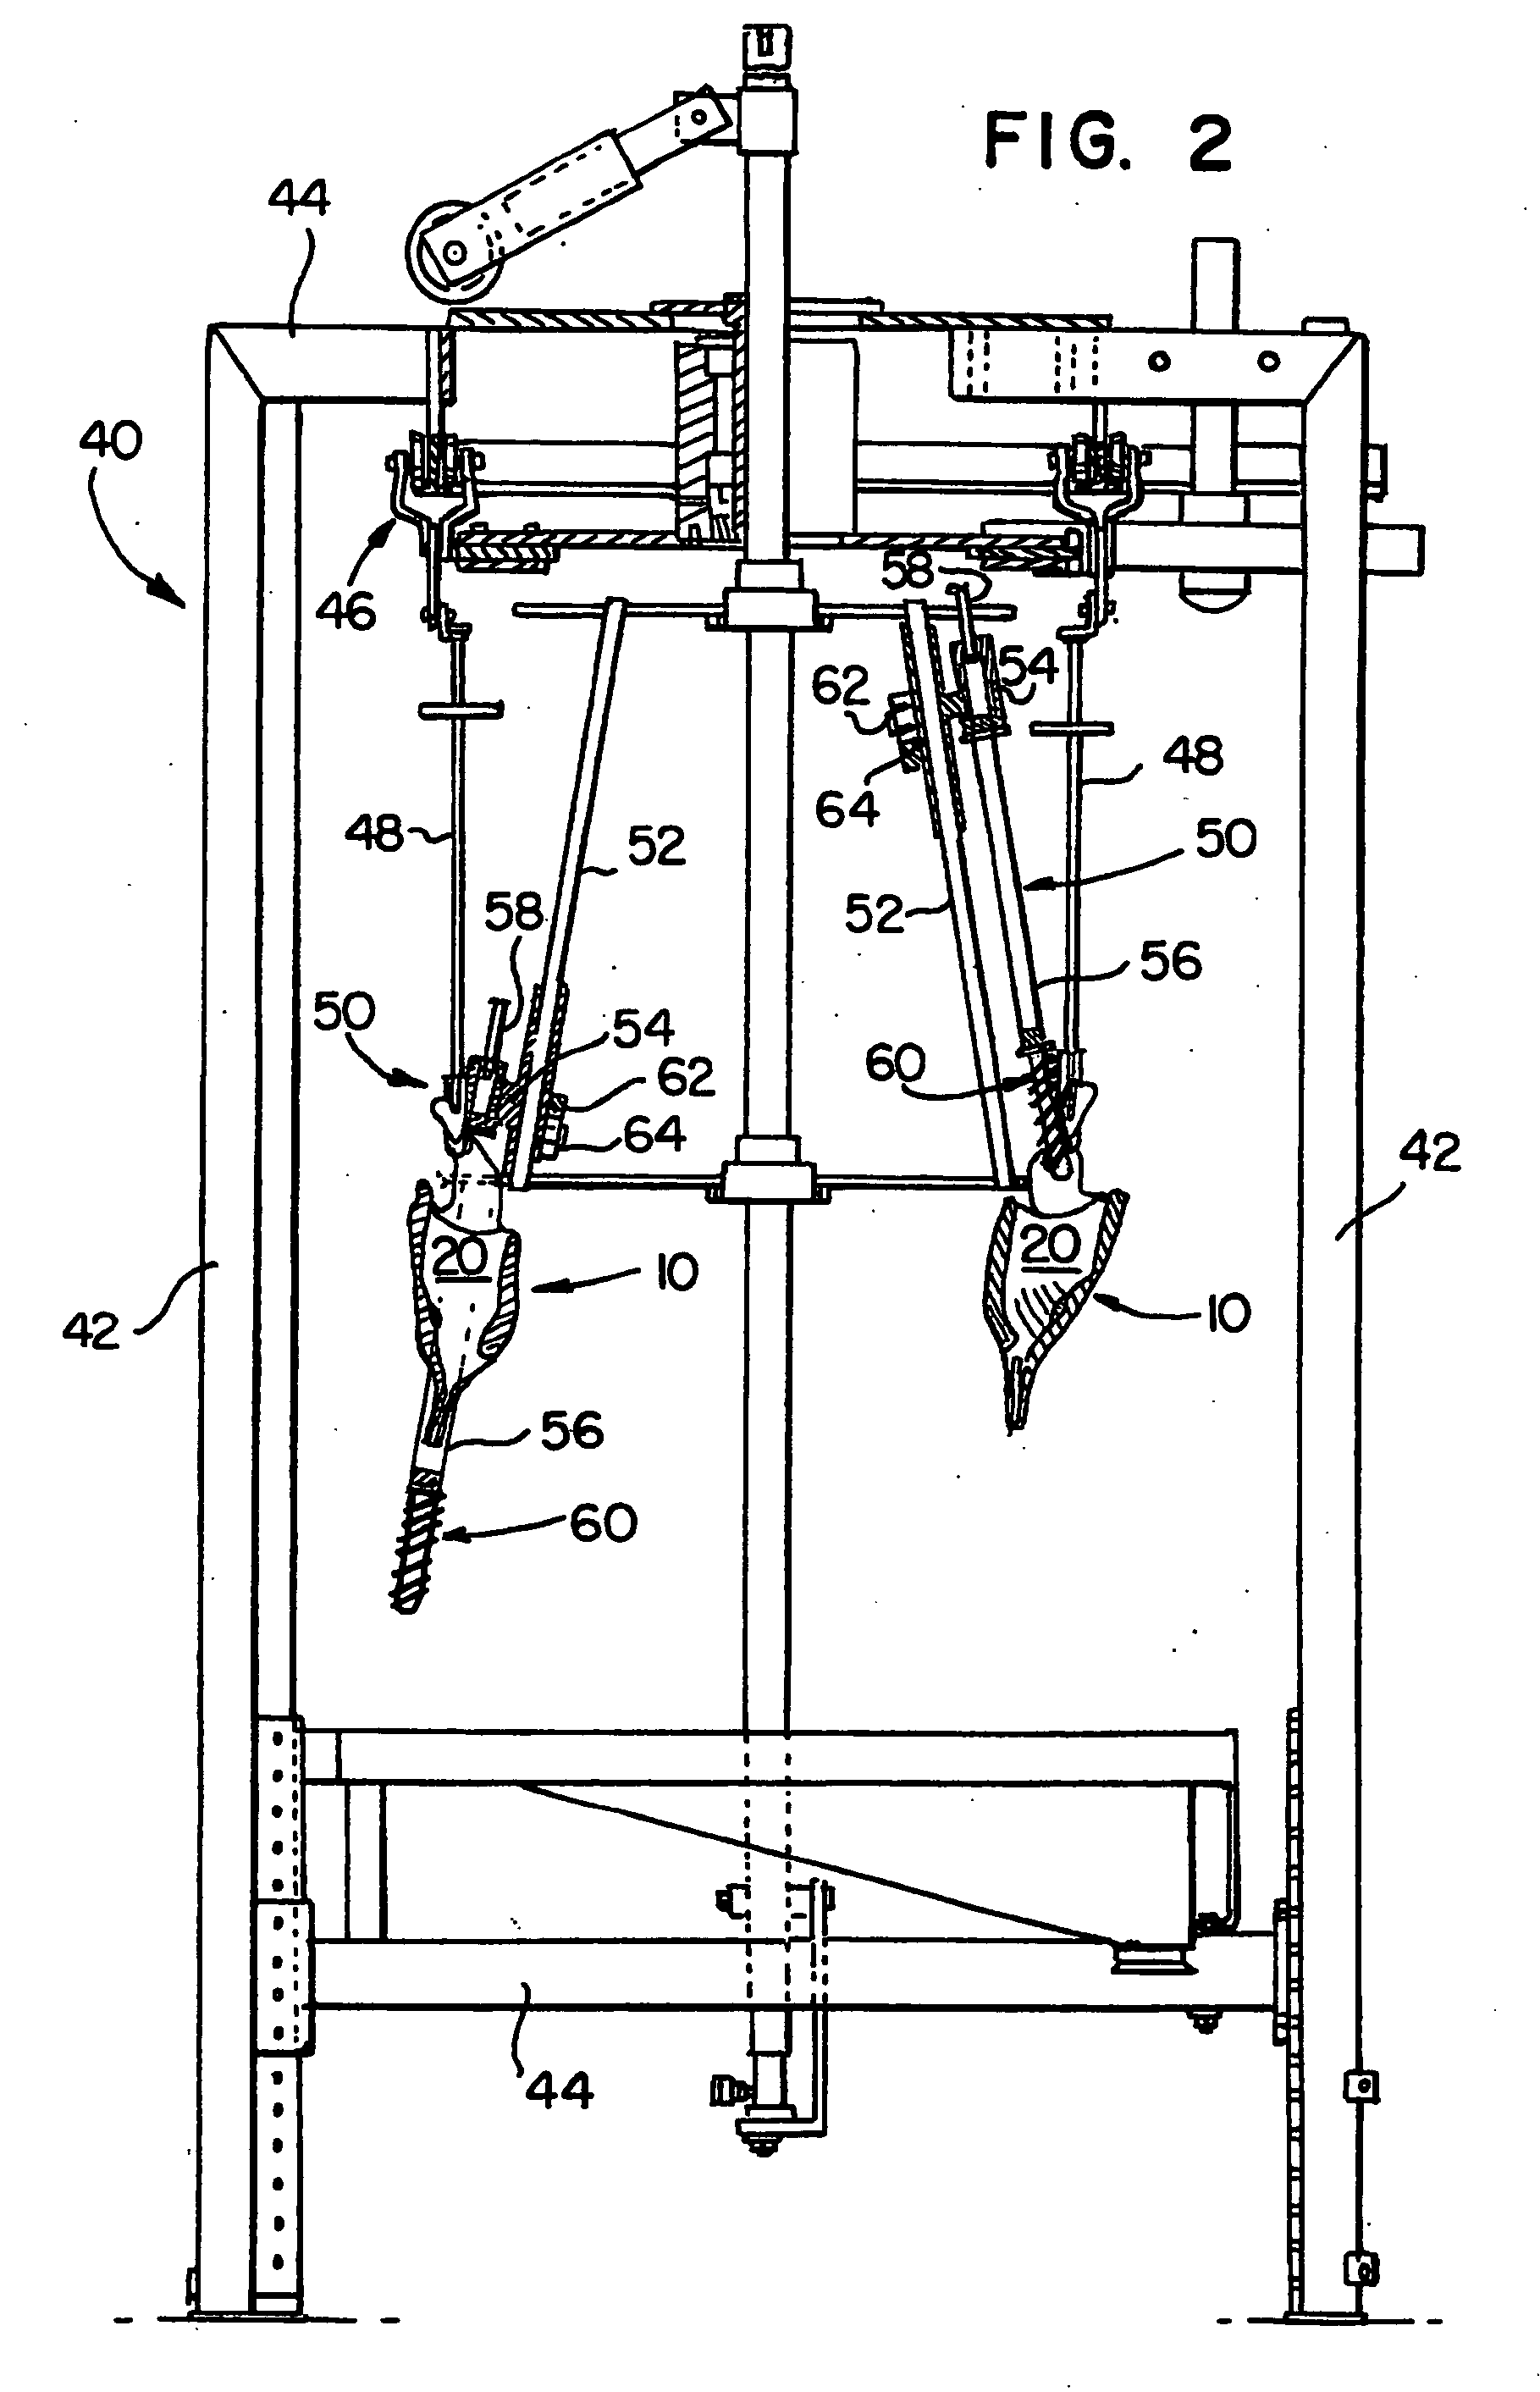 Decropping tool and wrapped cam for use in food processing machinery